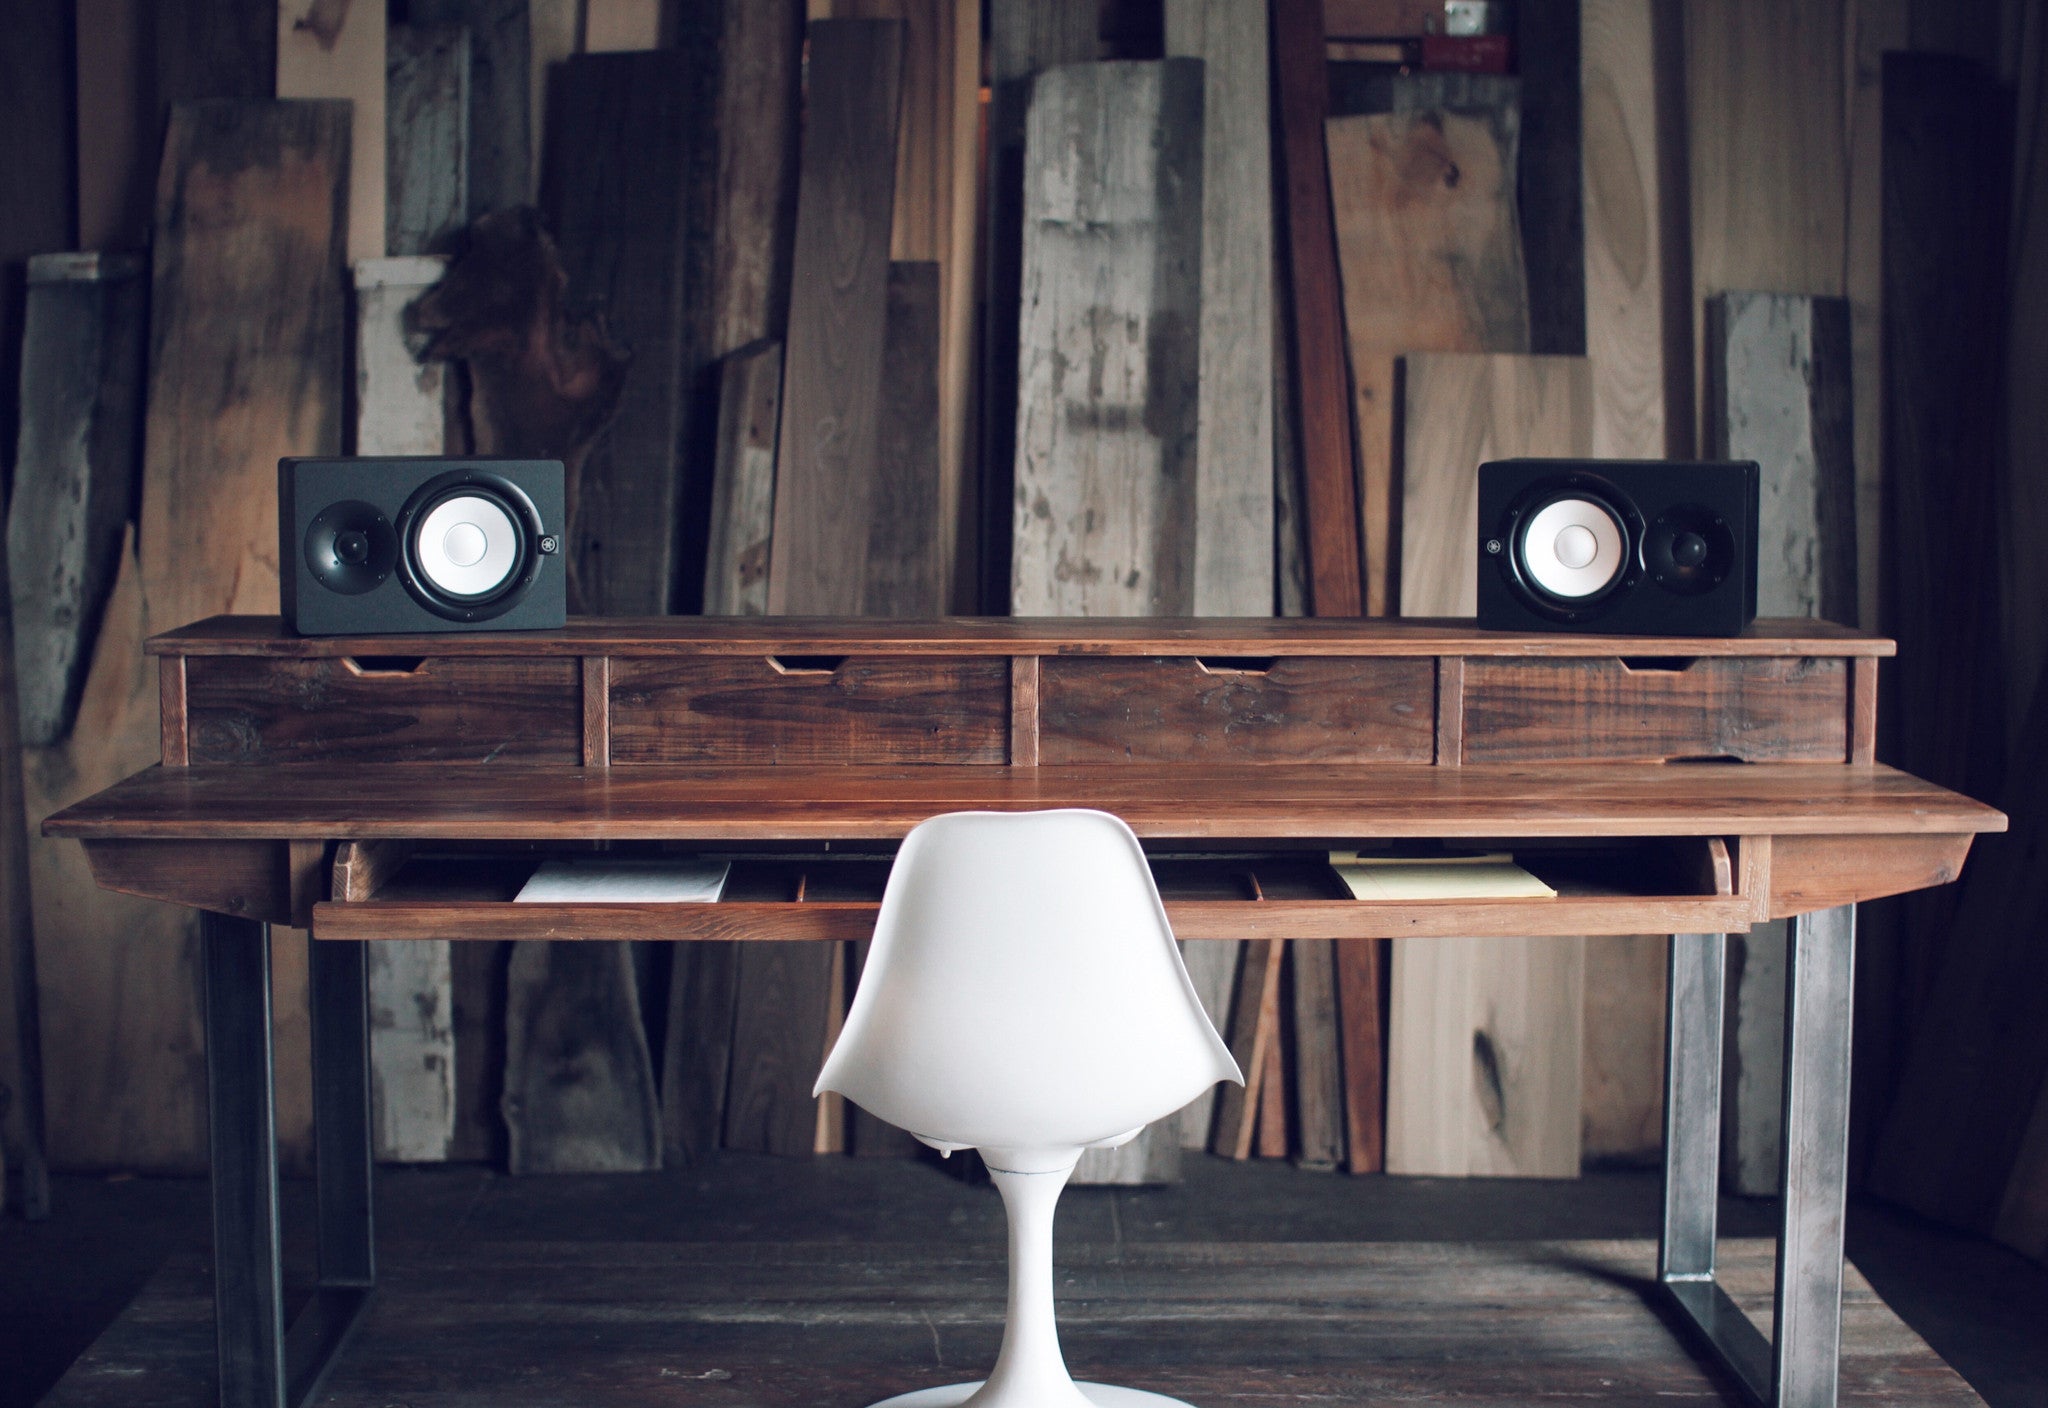 Monkwood SD88 Studio Desk in Rustic Reclaimed Wood for Audio / Video / Music / Film / Production